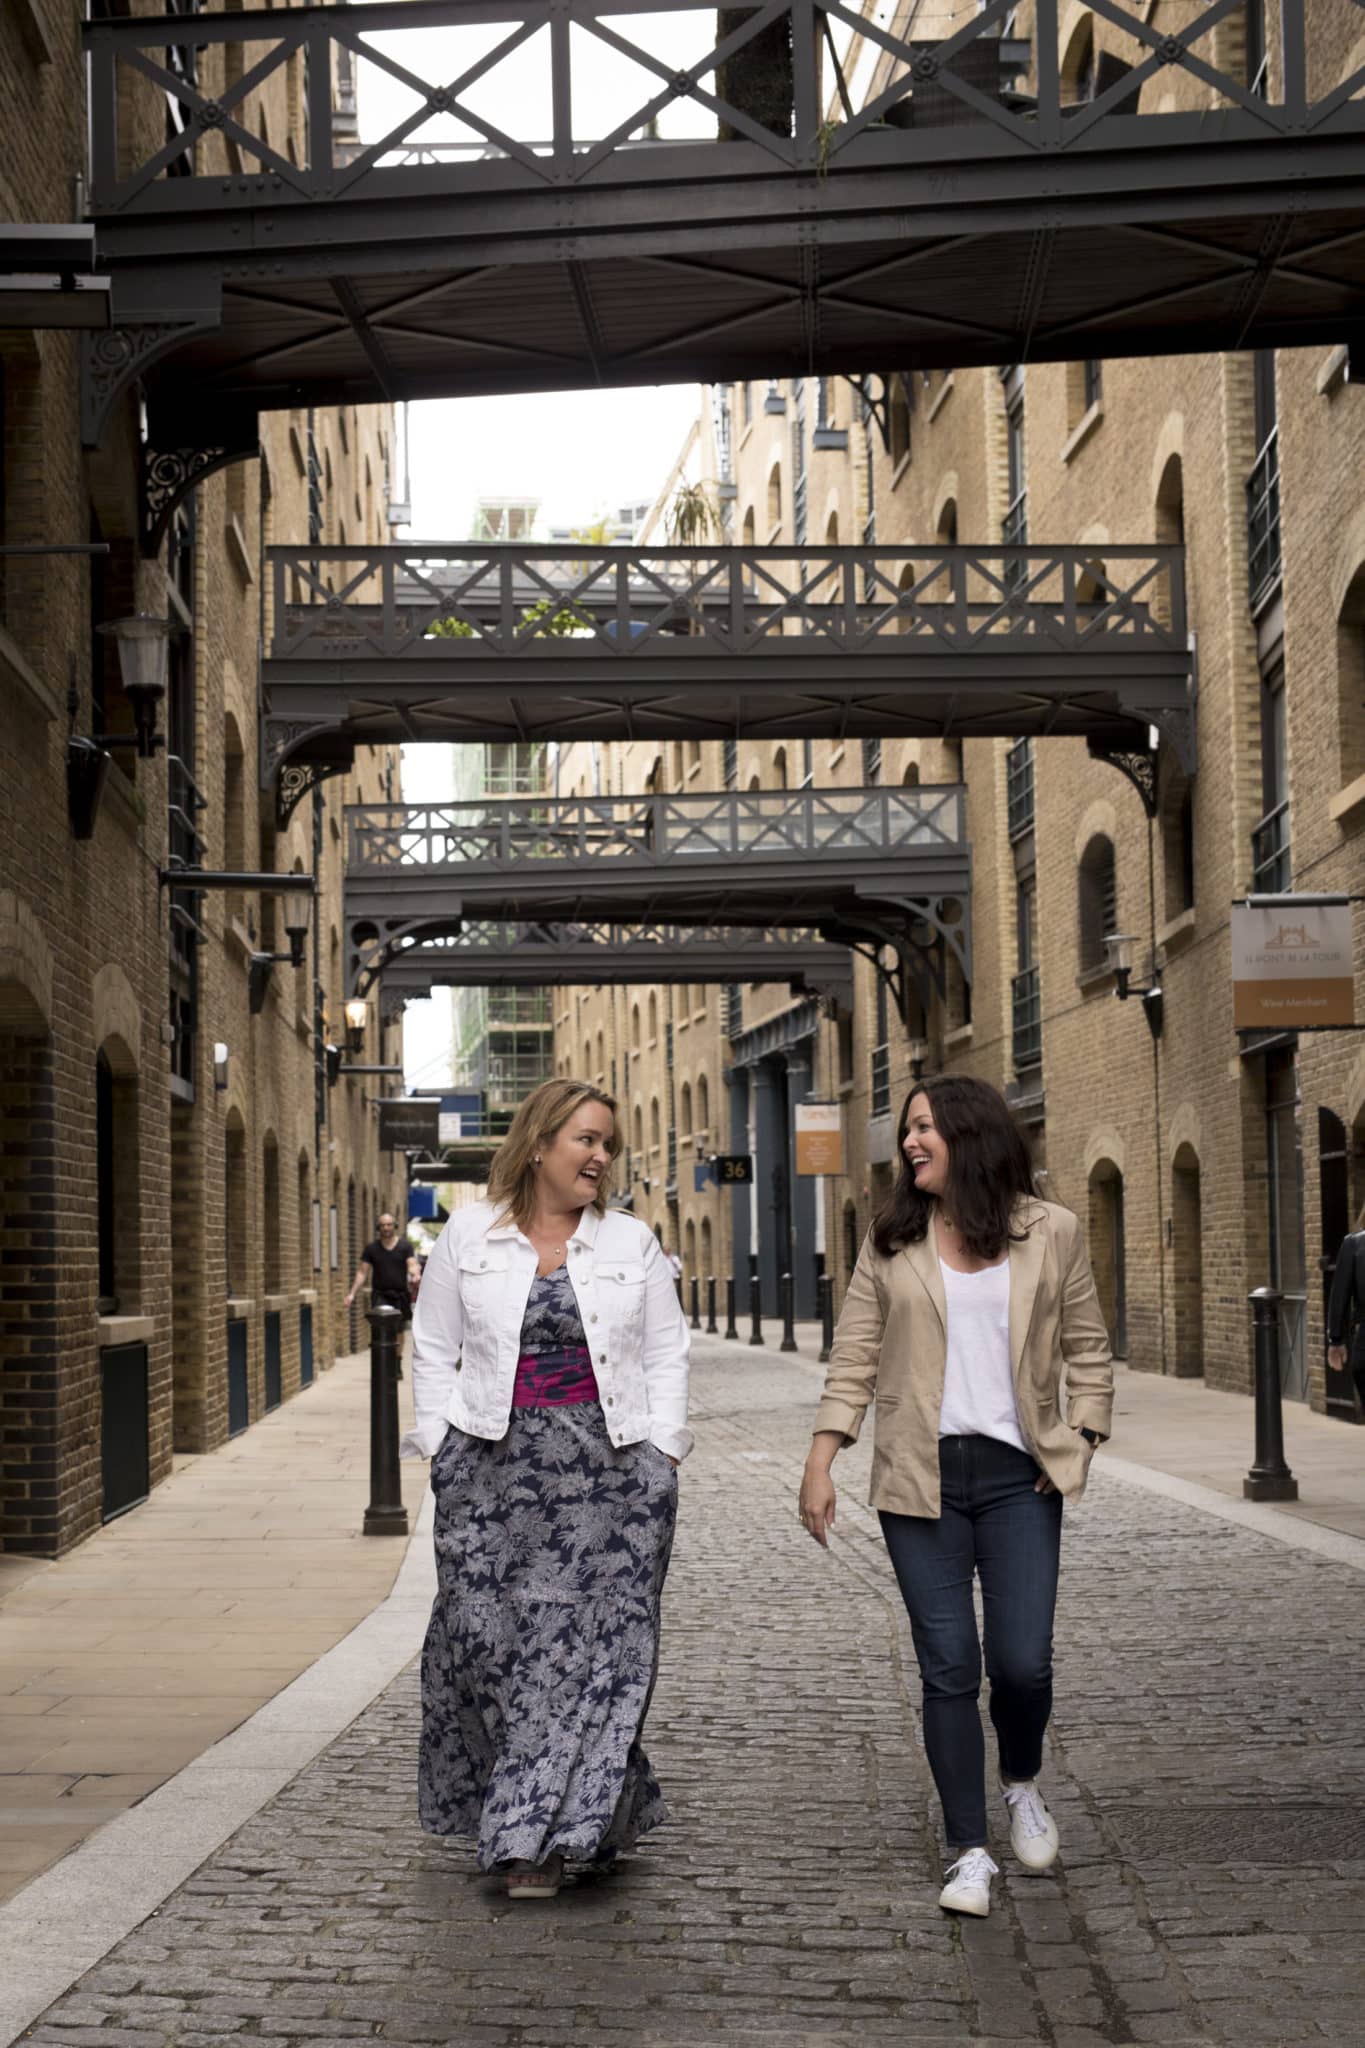 Emily and Amy in London May 2022. Let us show you how amazing this city can be!